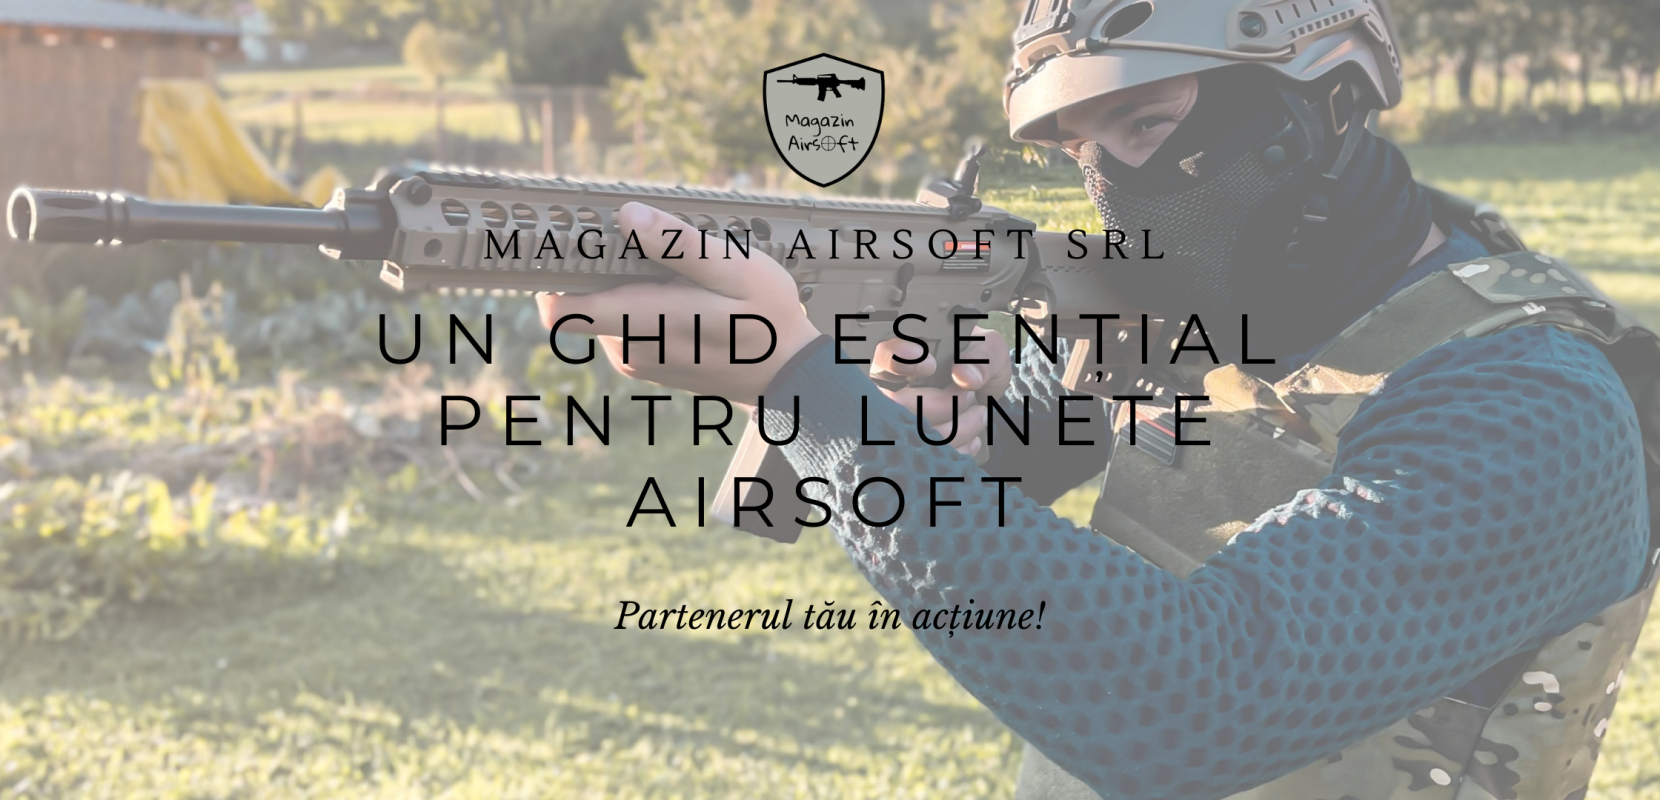 Lunete Airsoft